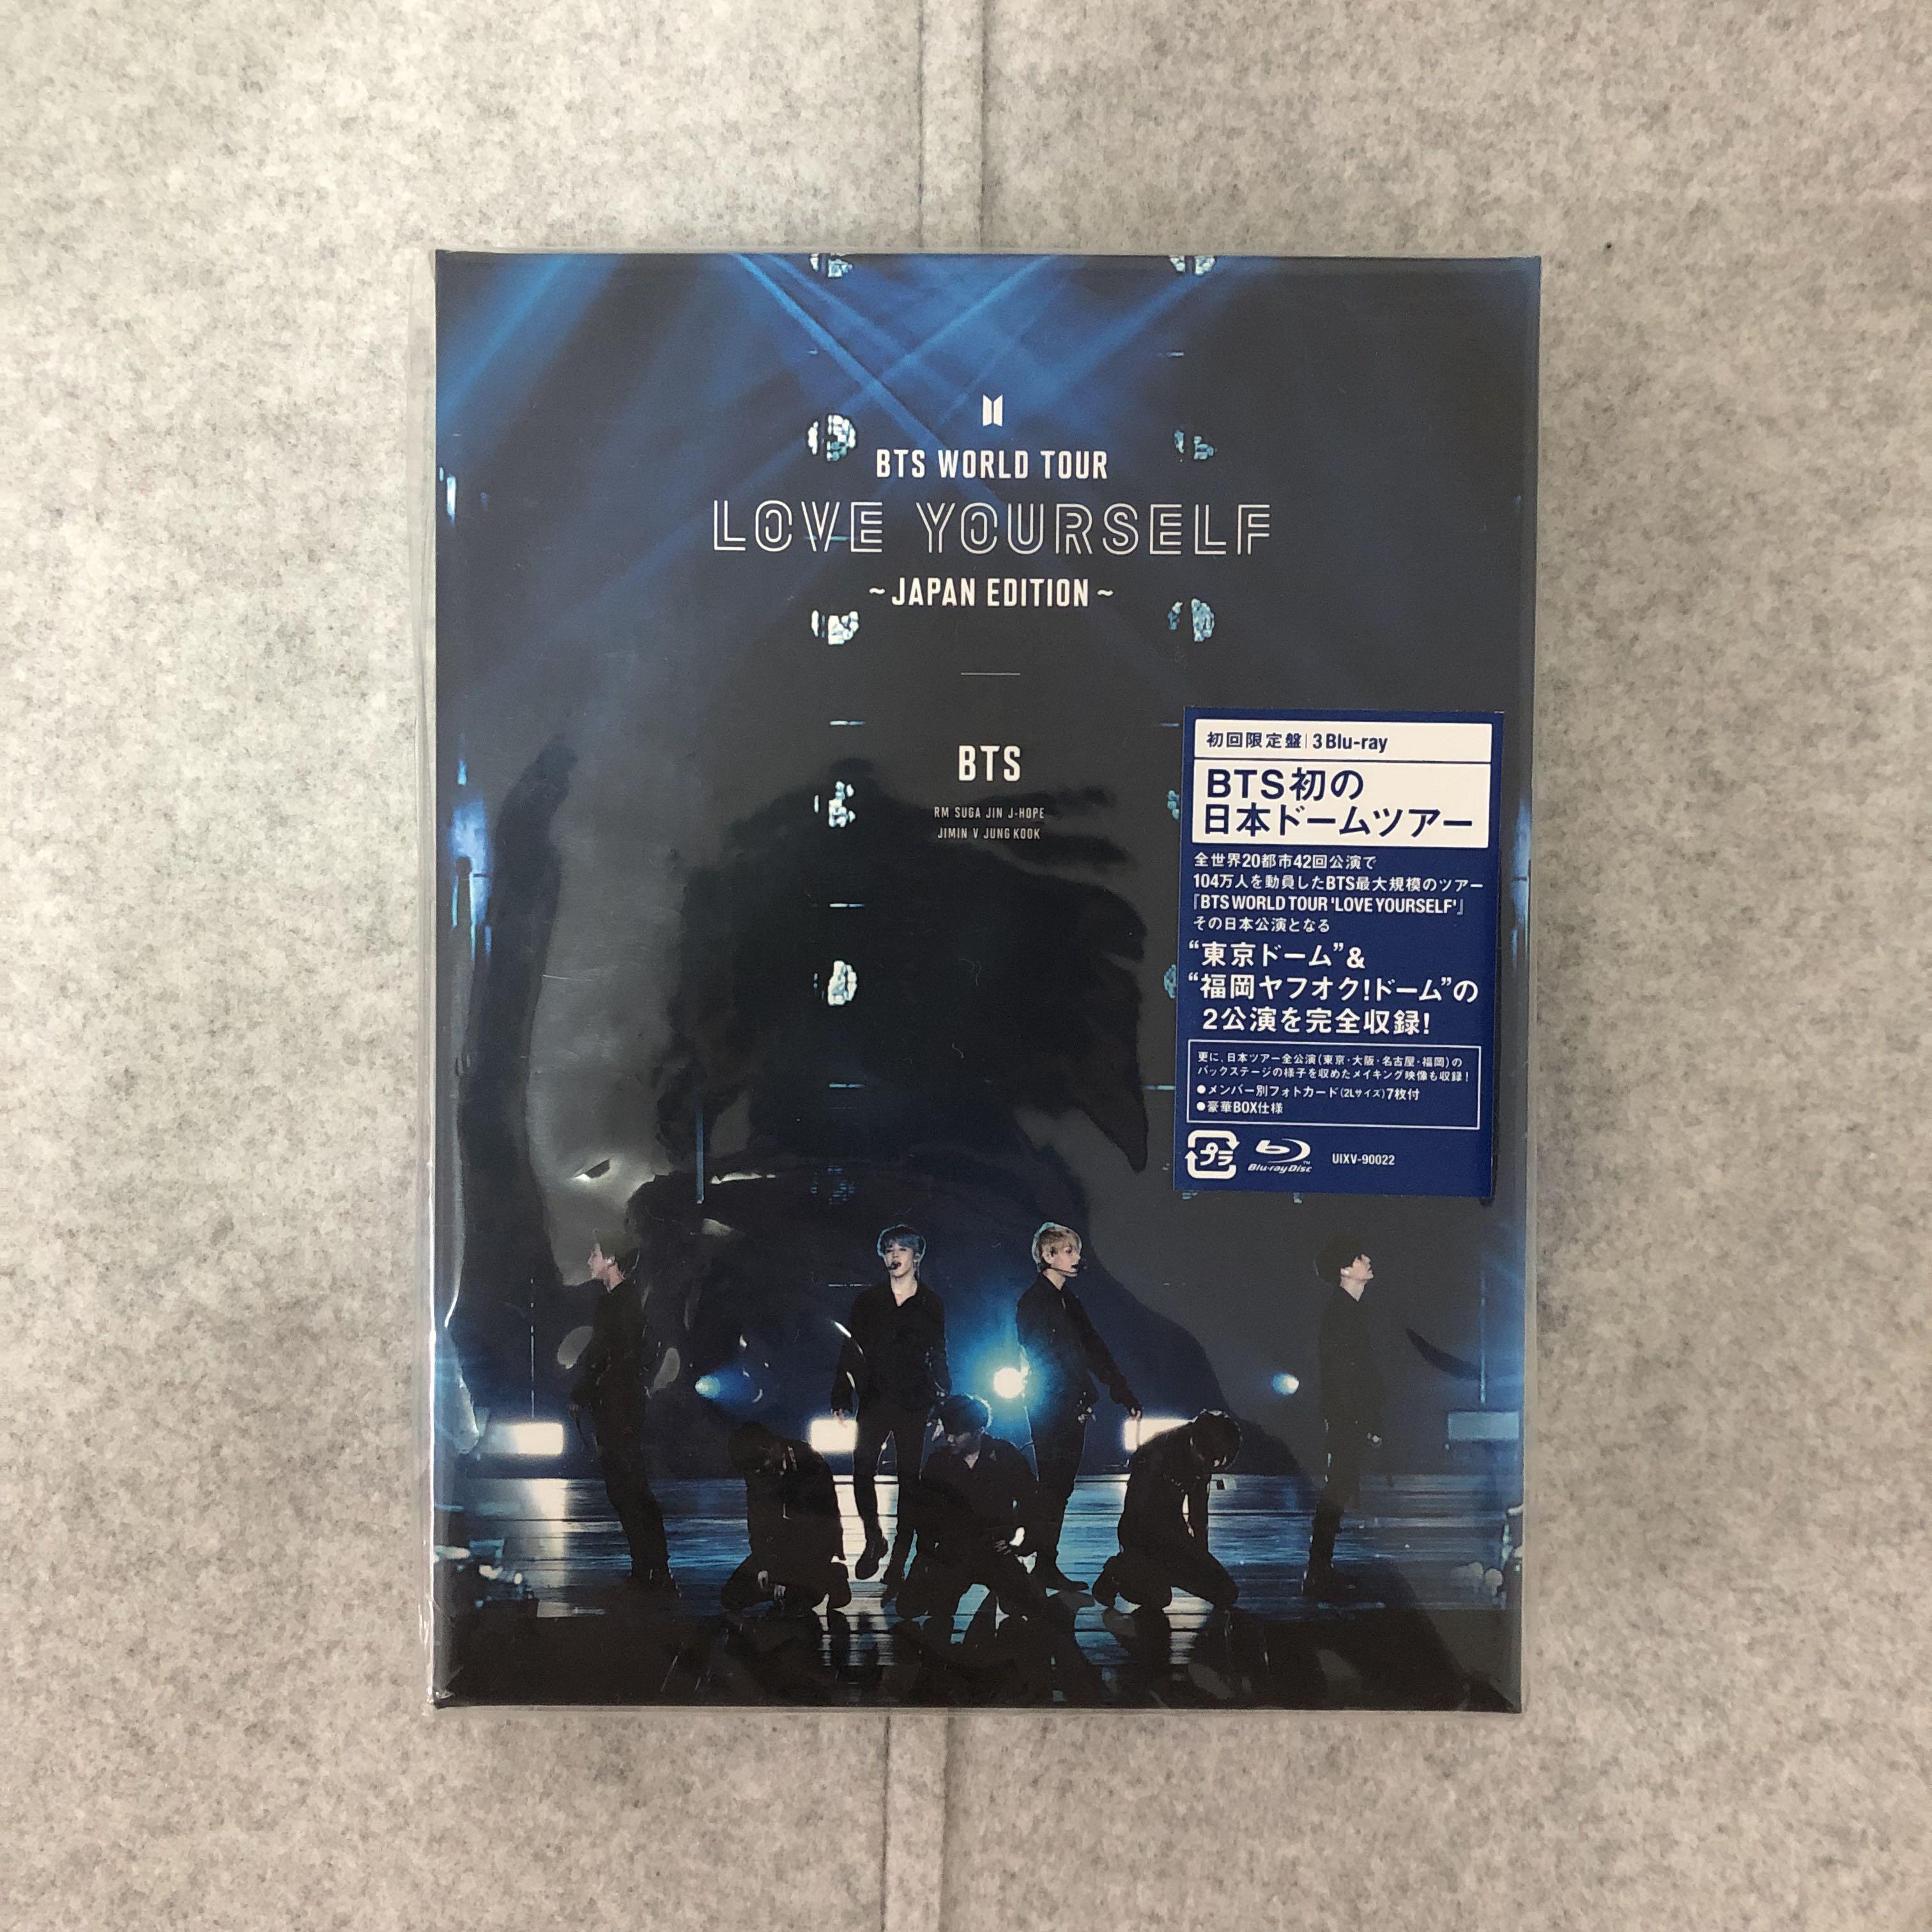 BTS LOVE YOURSELF JAPAN Blu-ray ノートブック付き-connectedremag.com